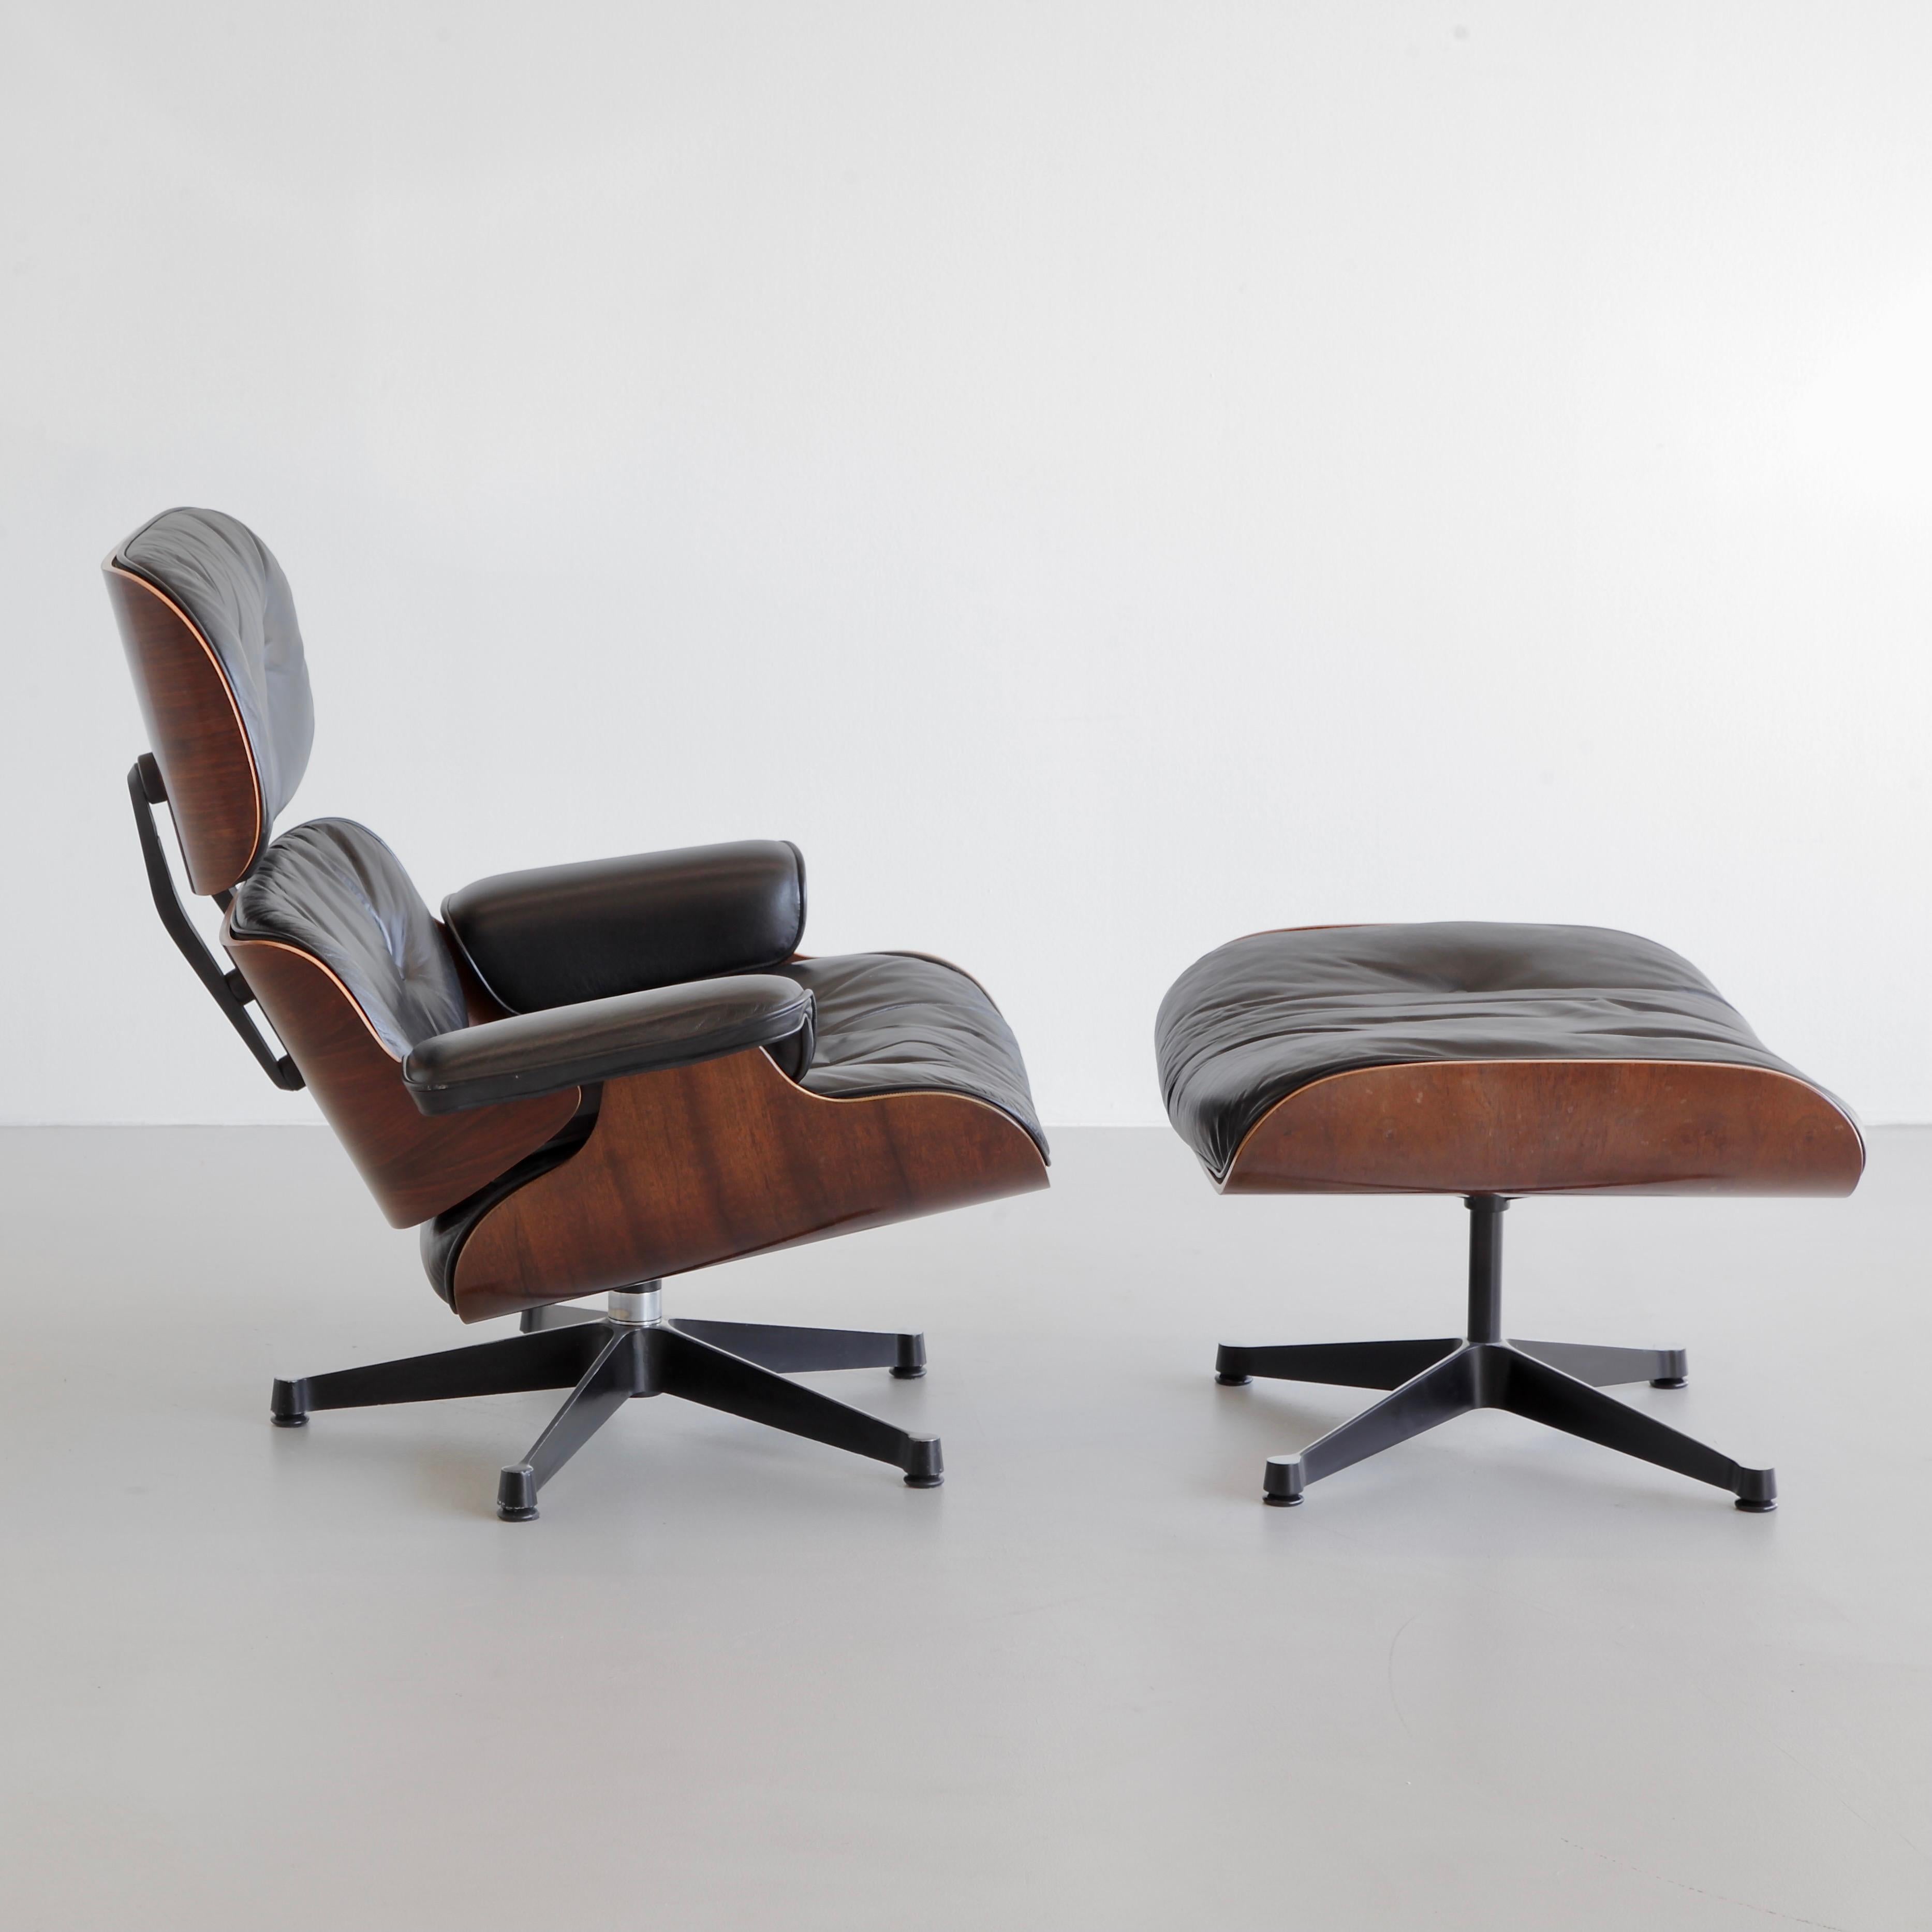 German Charles & Ray Eames Lounge Chair and Footstool, Vitra 1970s